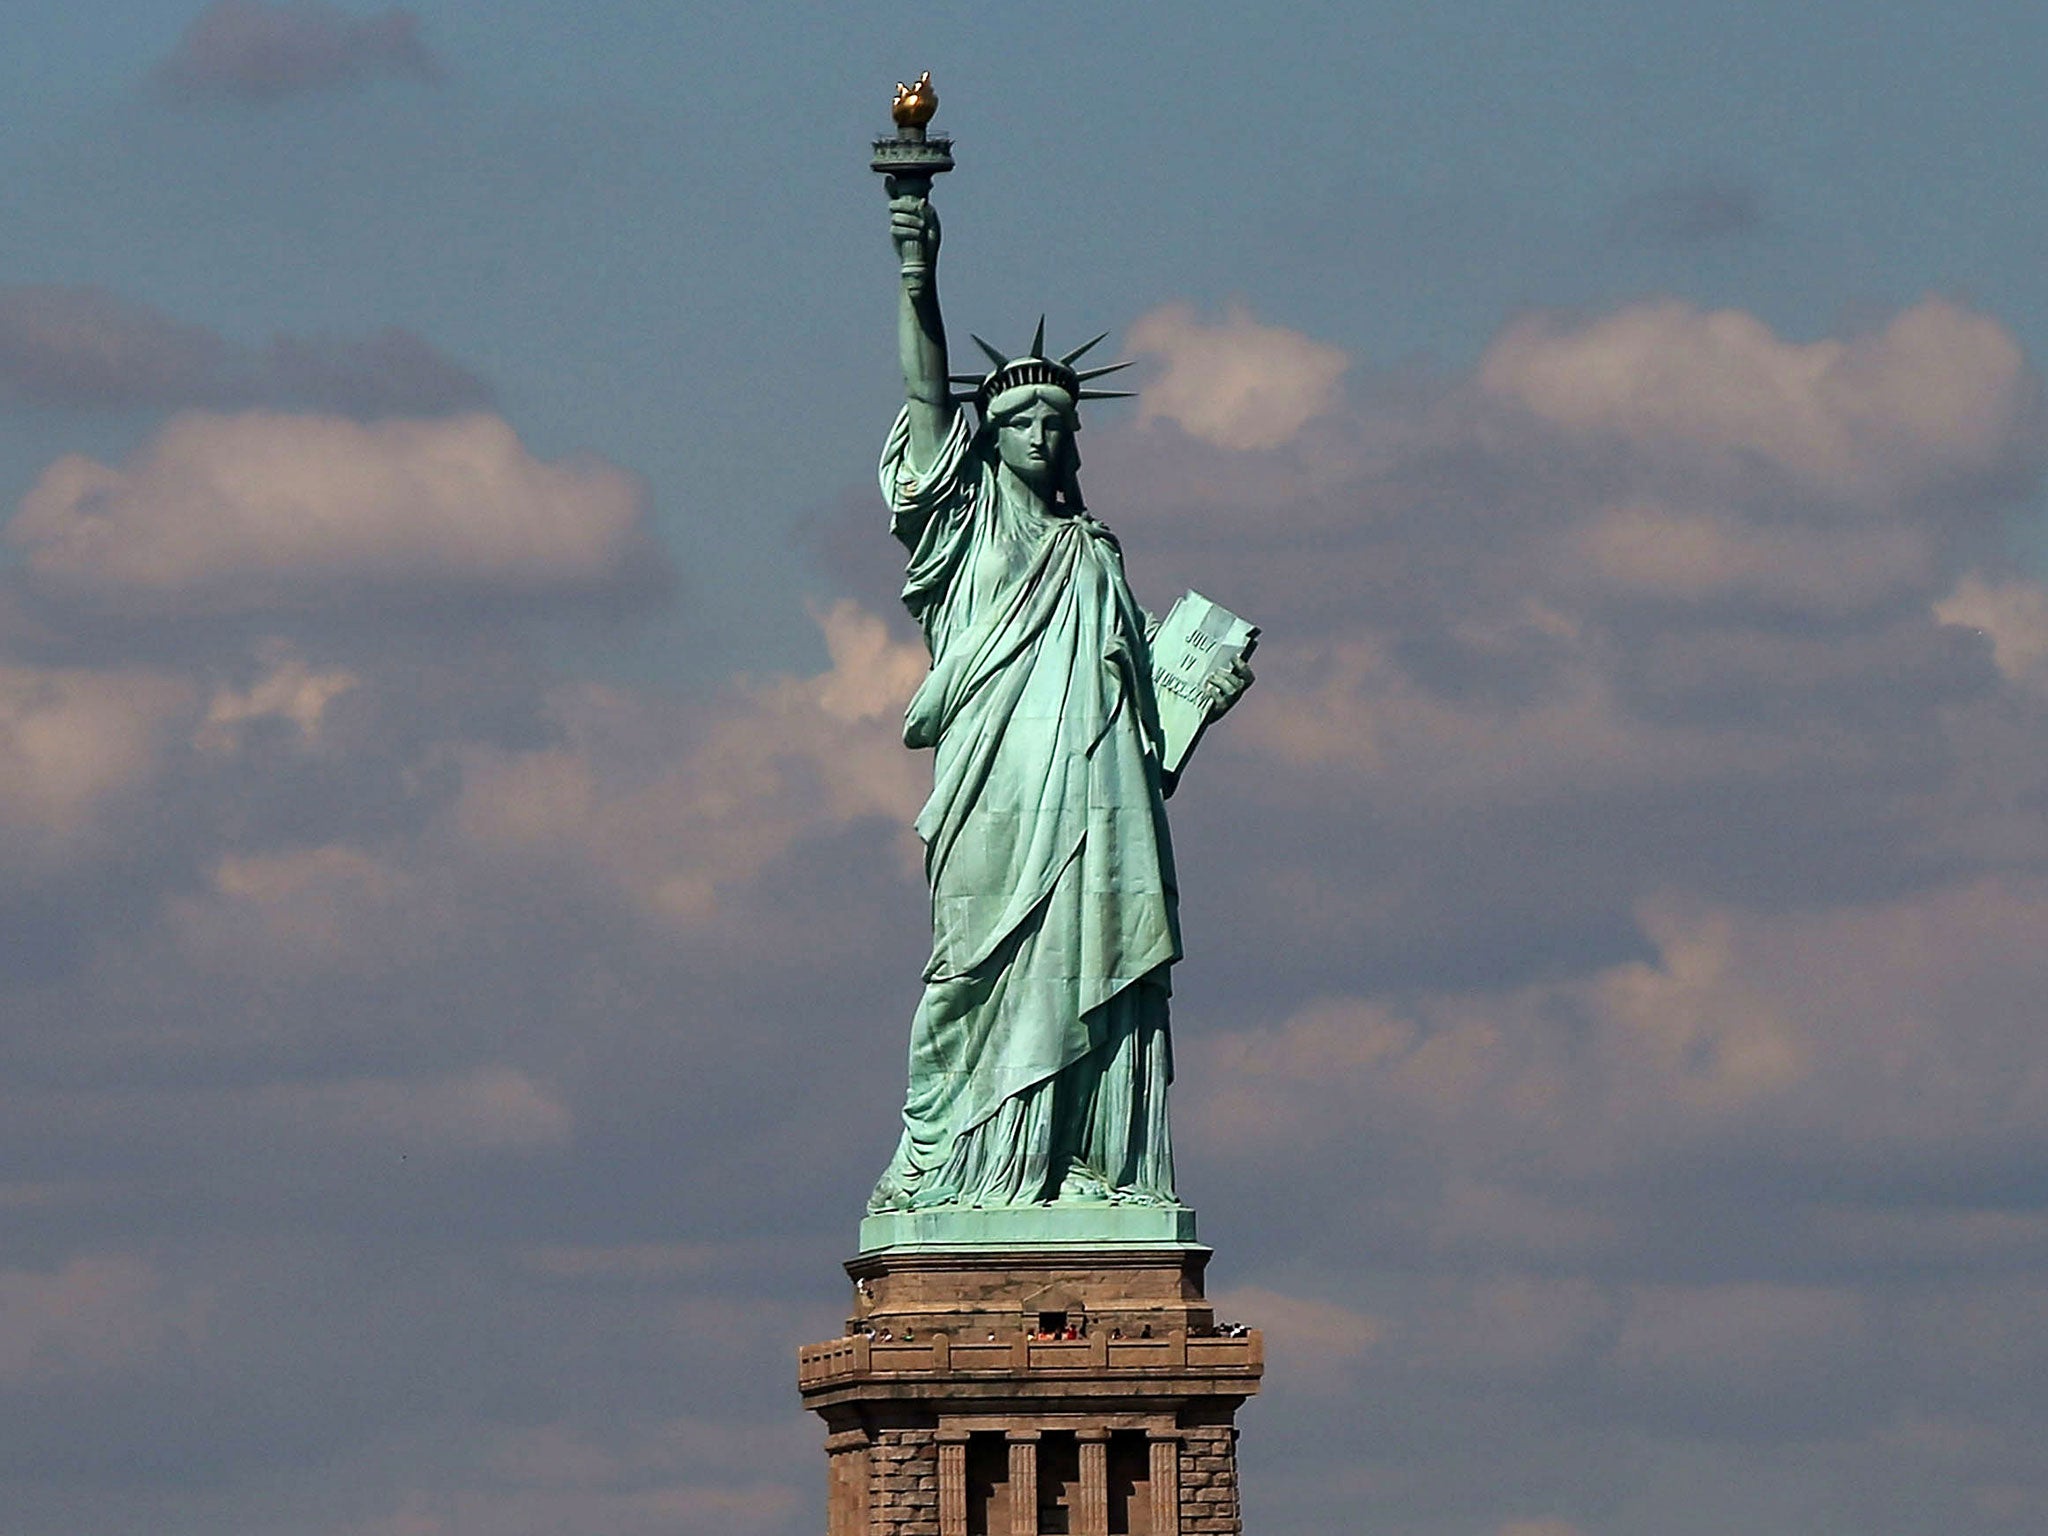 The Statue of Liberty, one of the first sights that would have greeted the immigrants that came into Ellis Island